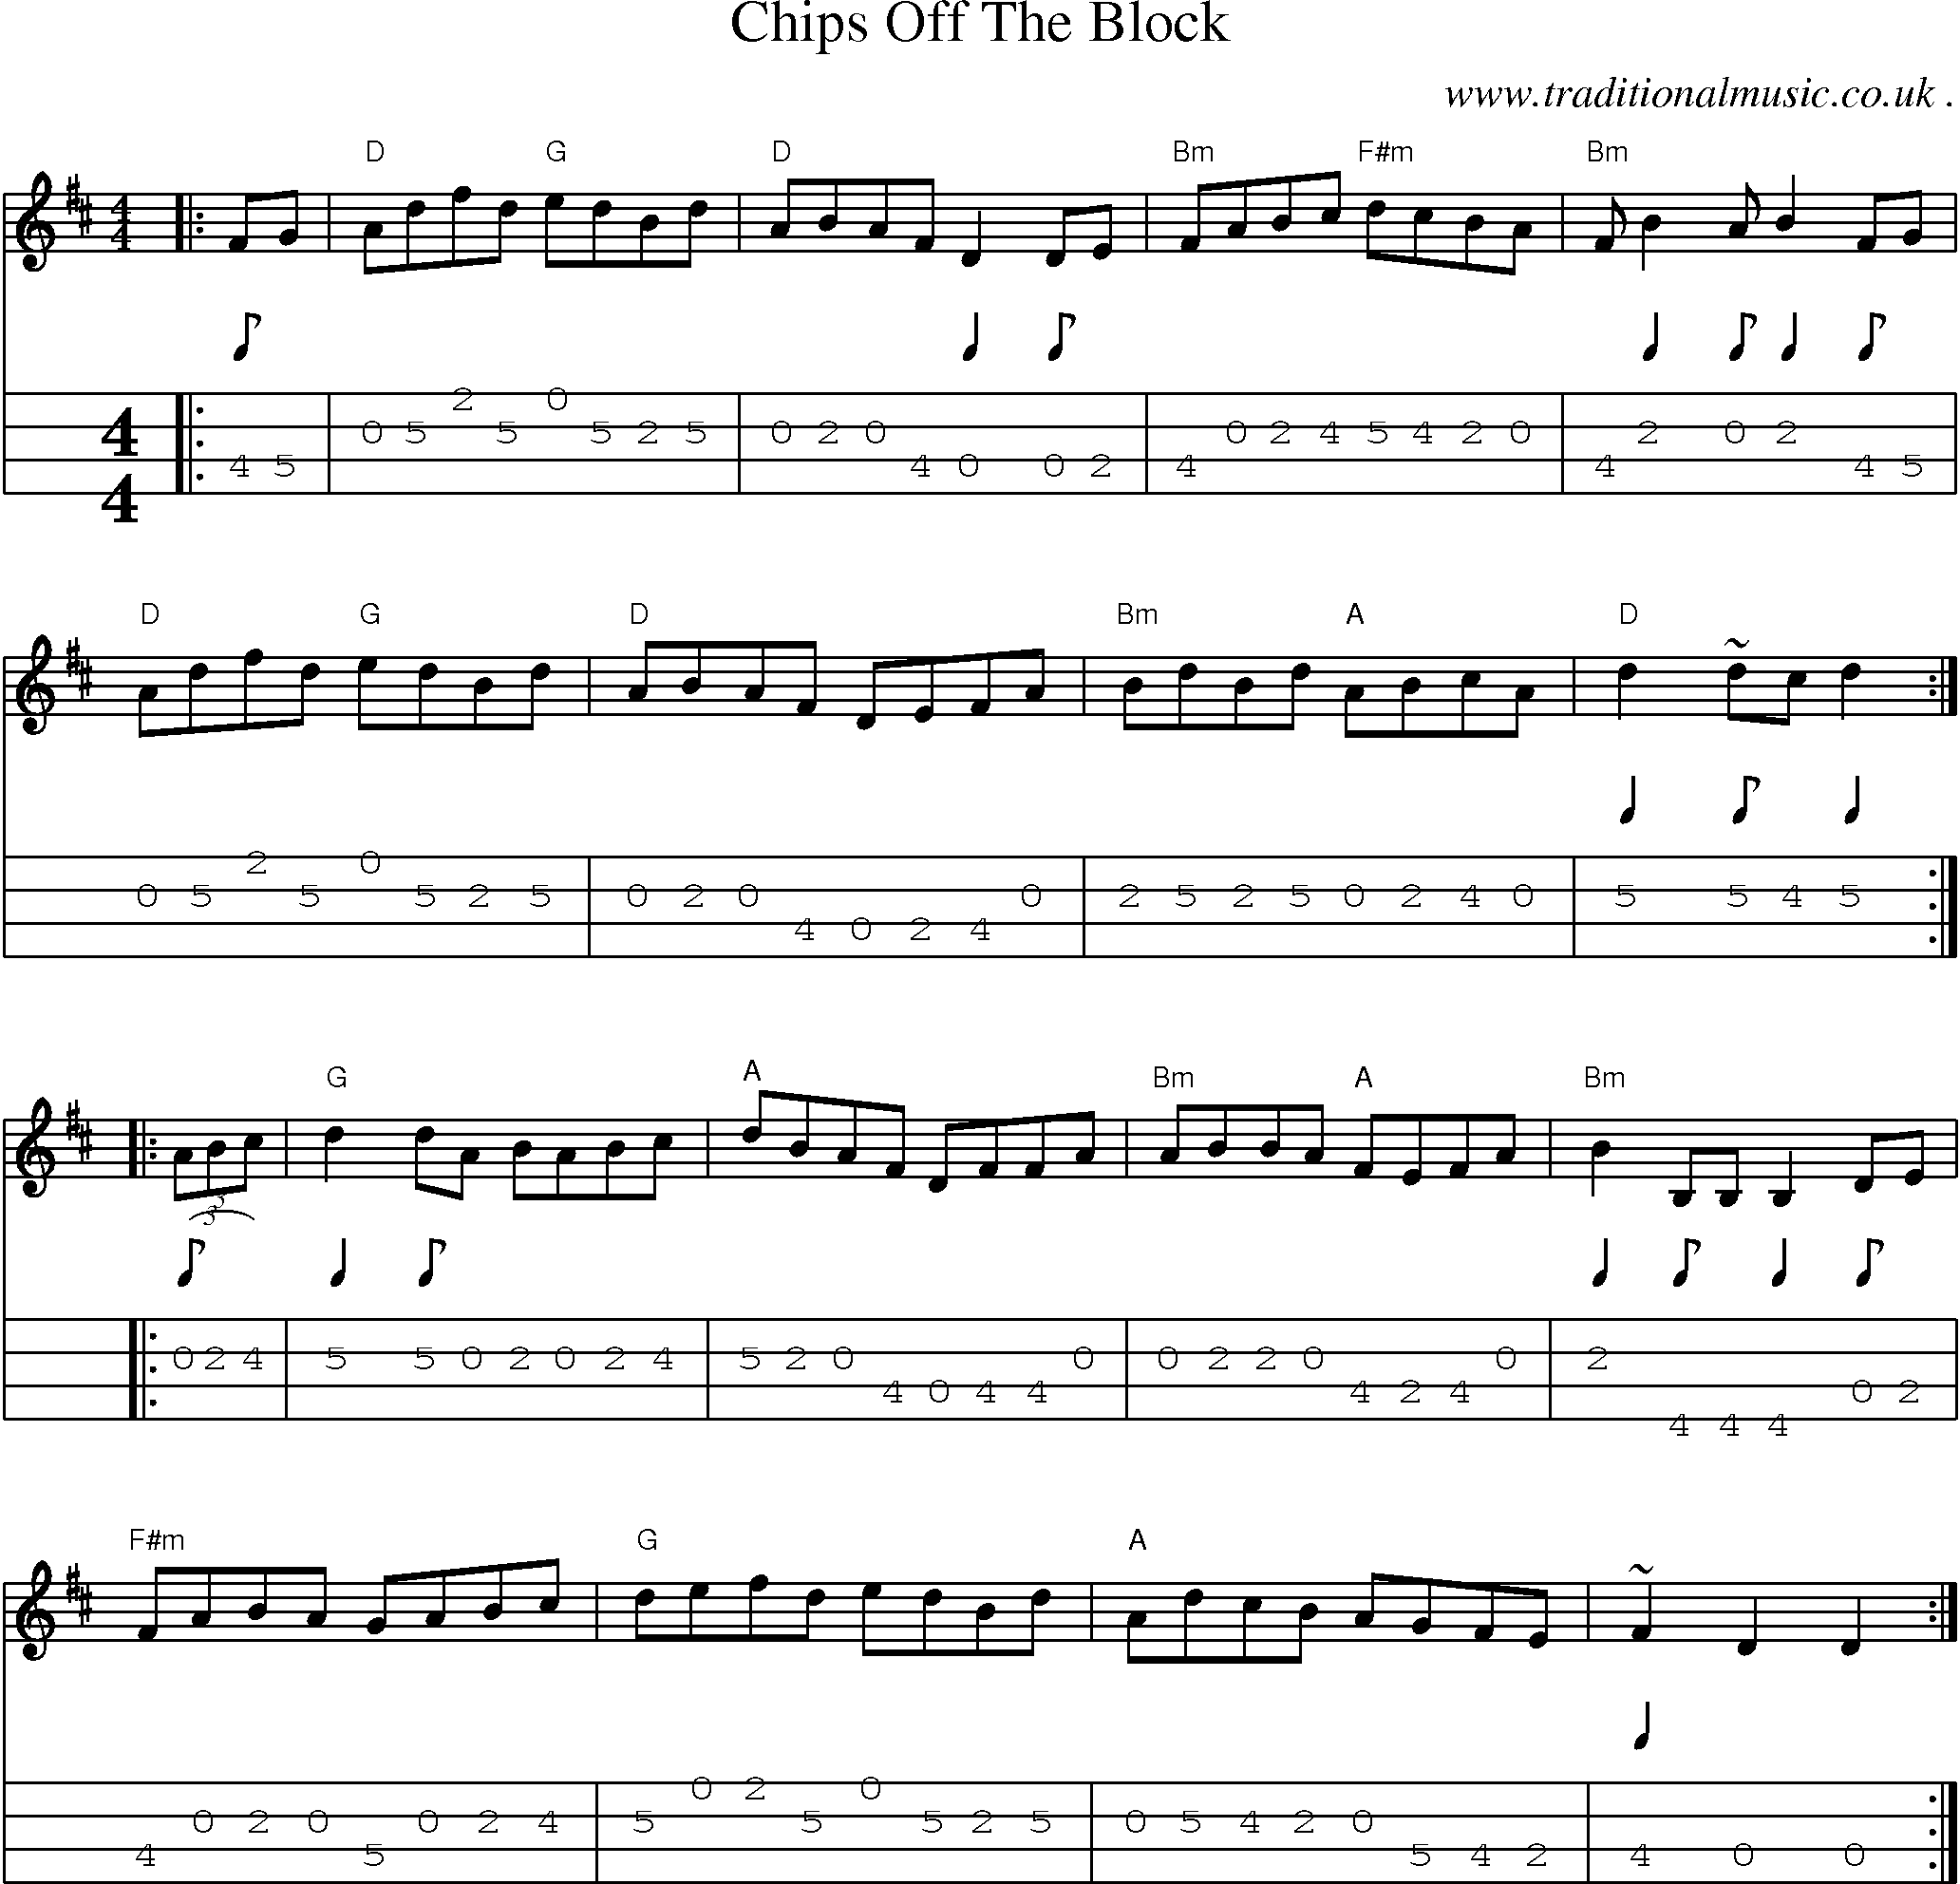 Music Score and Guitar Tabs for Chips Off The Block